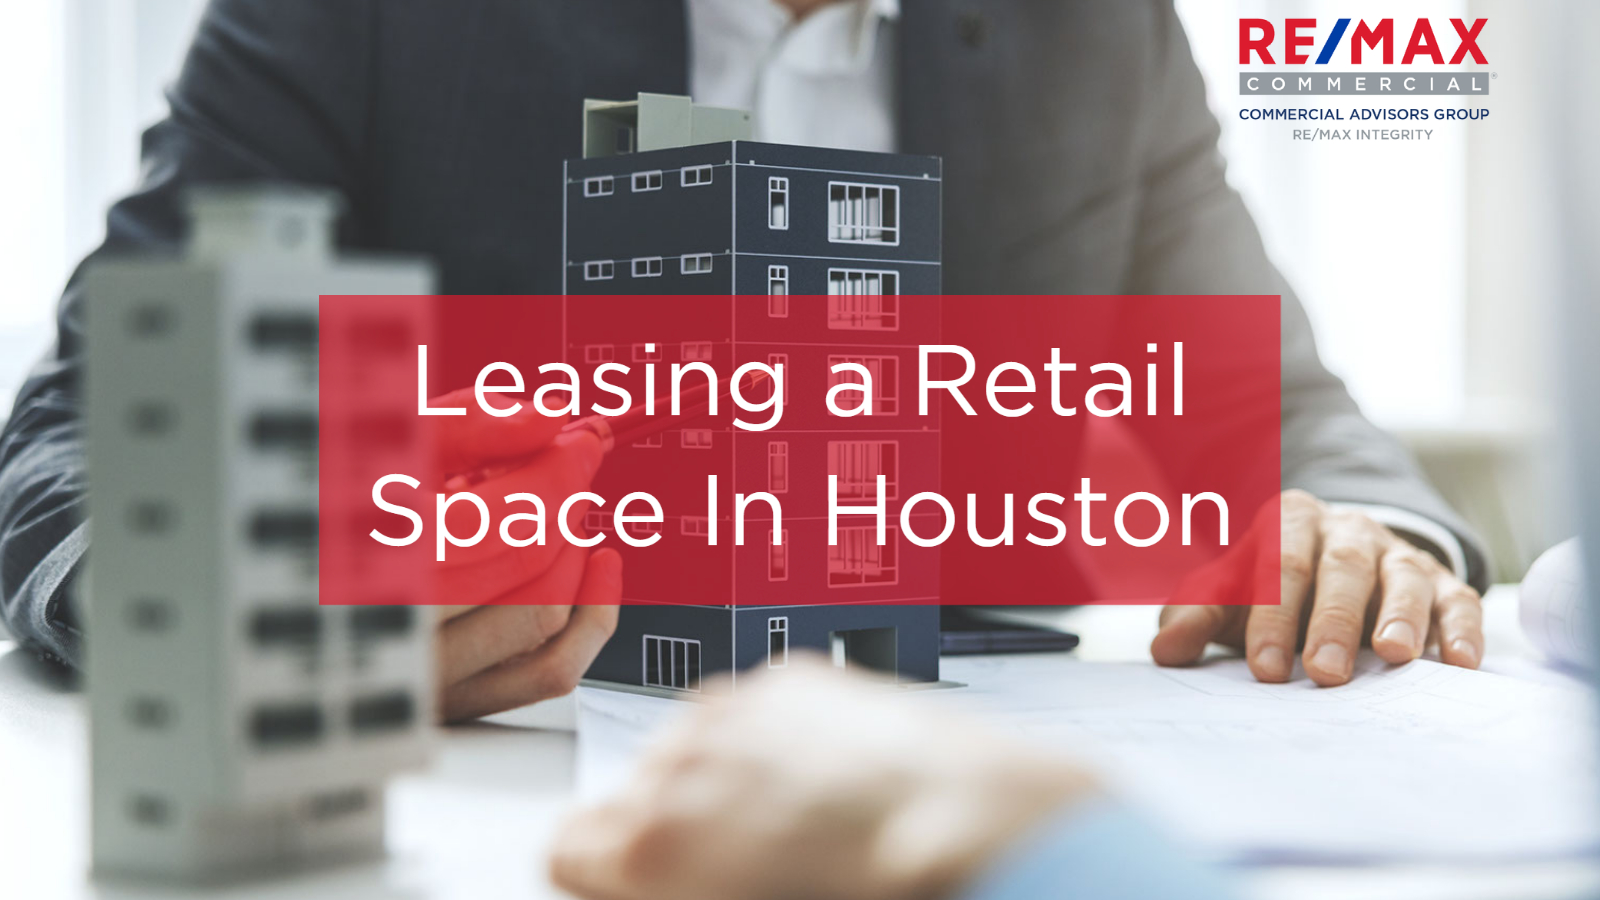 The 10 Things You Should Know About Leasing a Retail Space In Houston-1